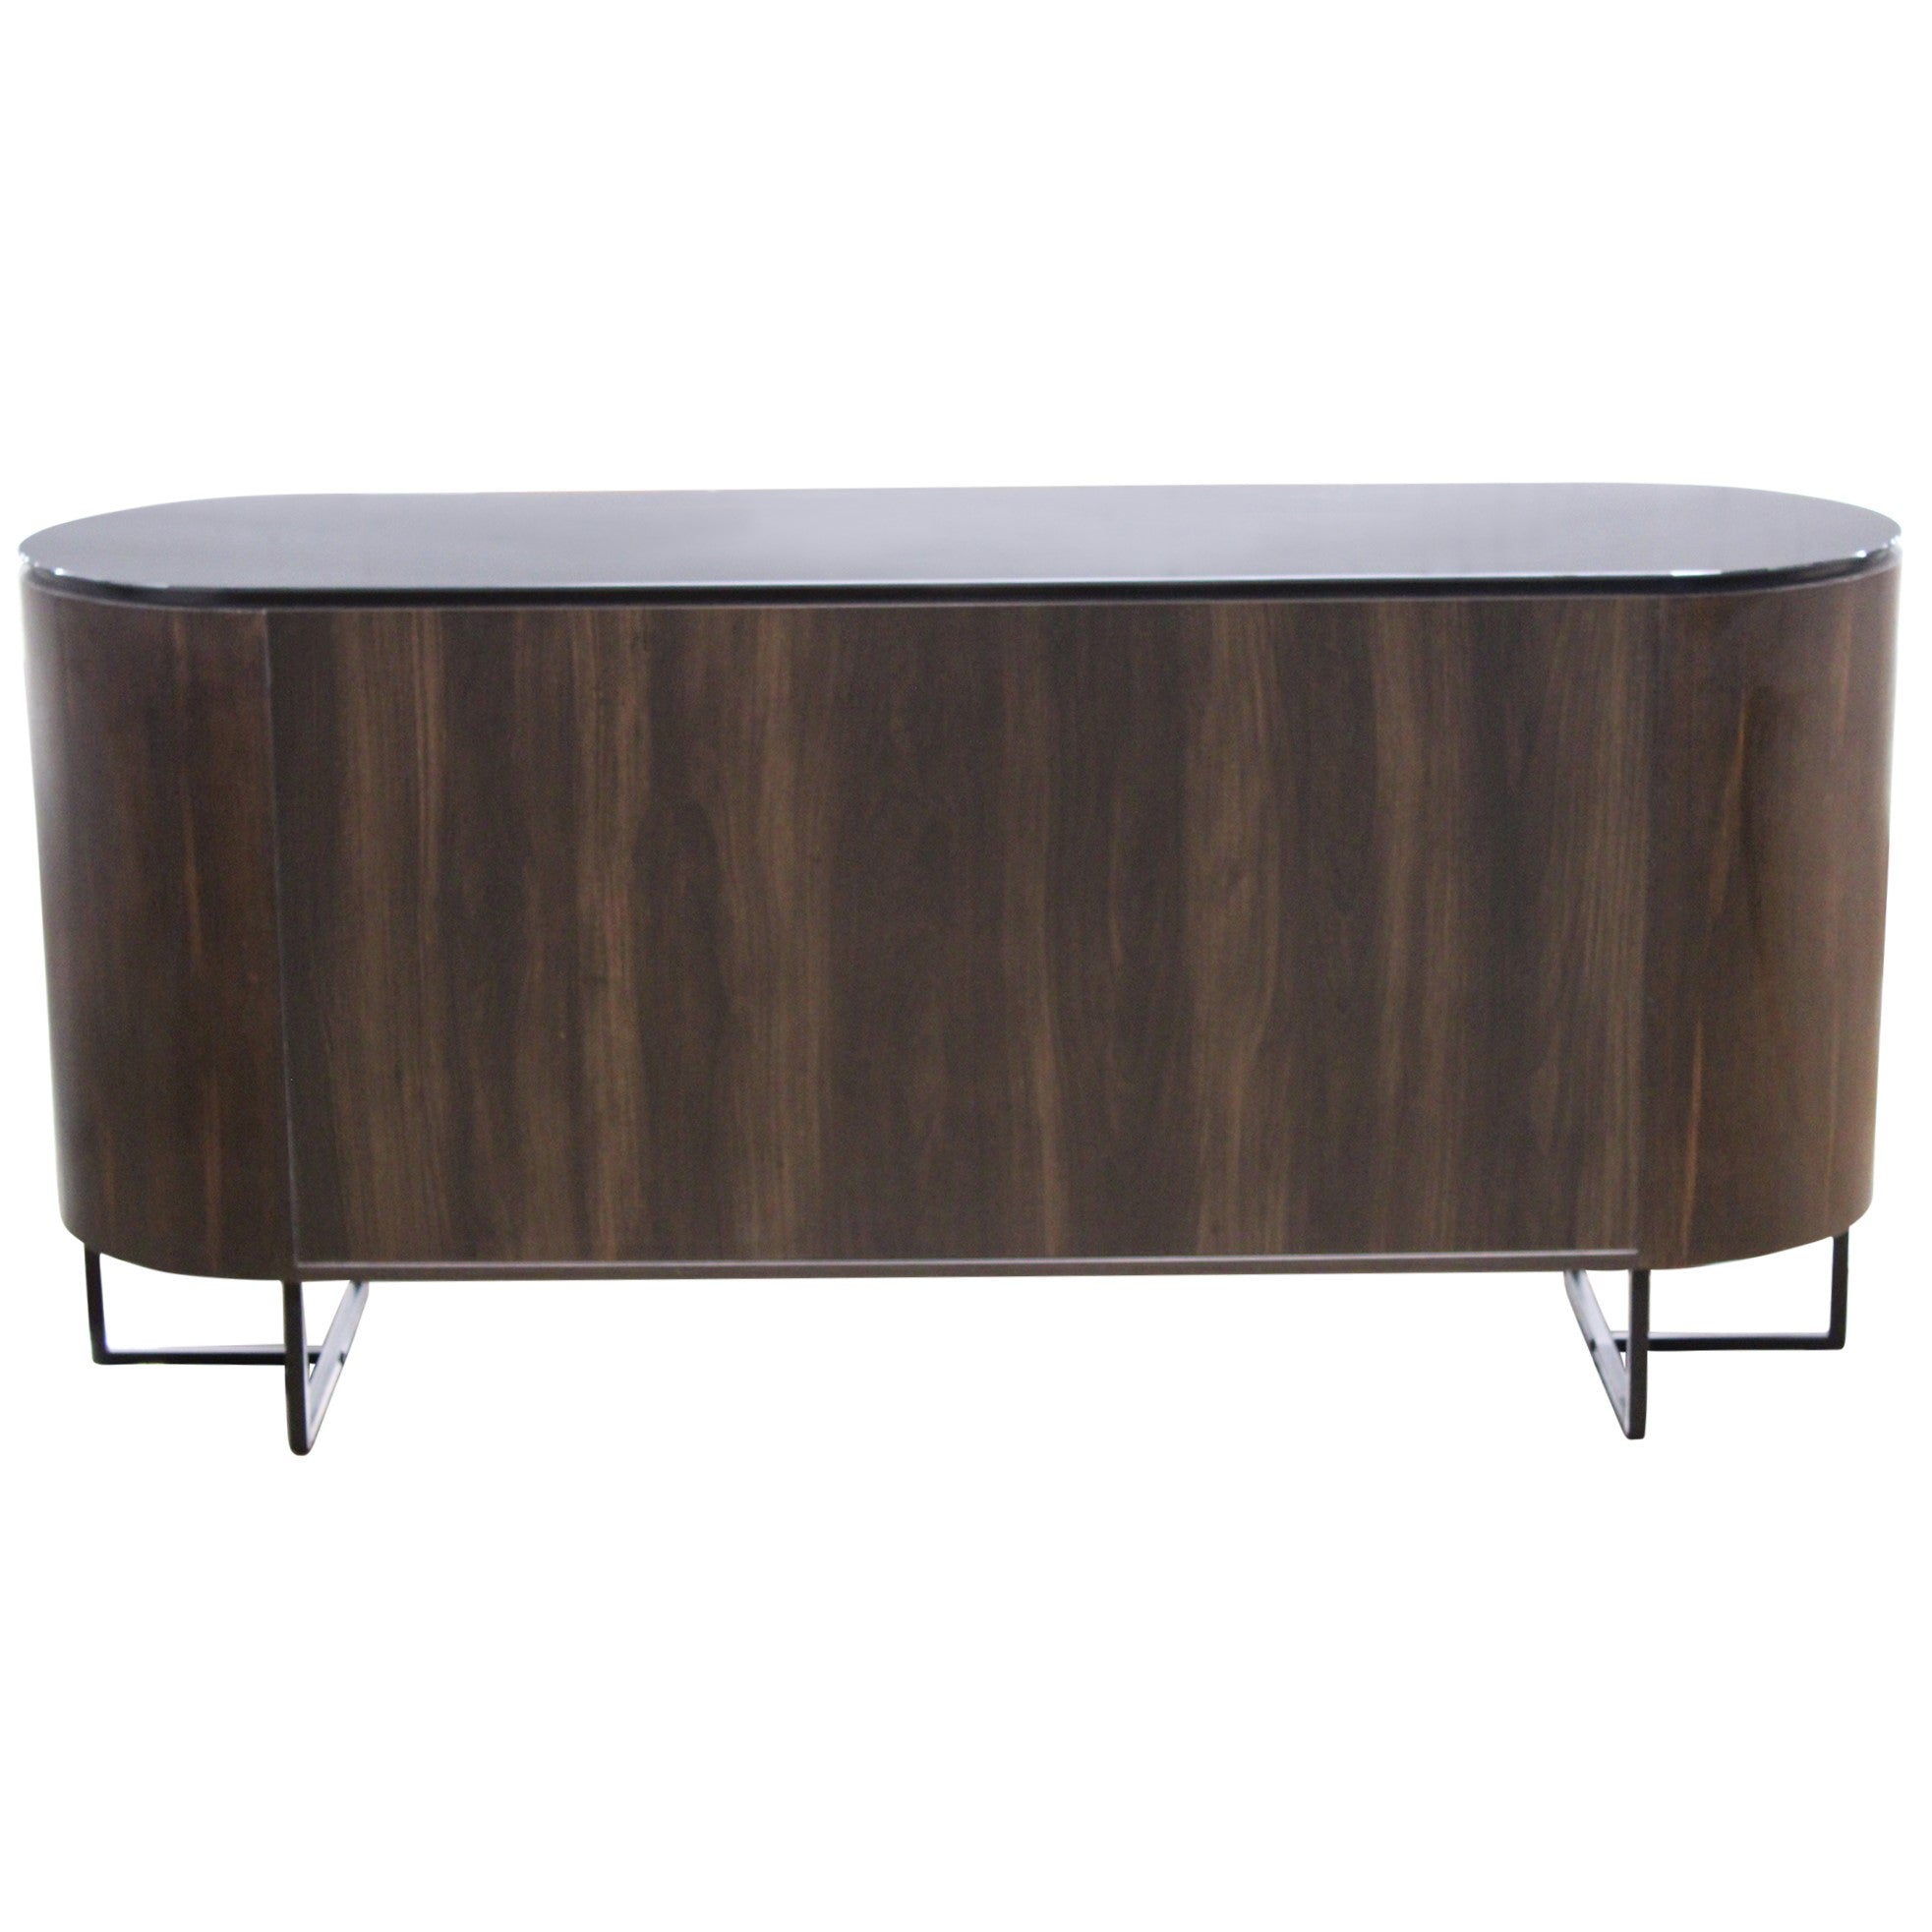 Etc. Romilda Sideboard Credenza, Brown - Preowned